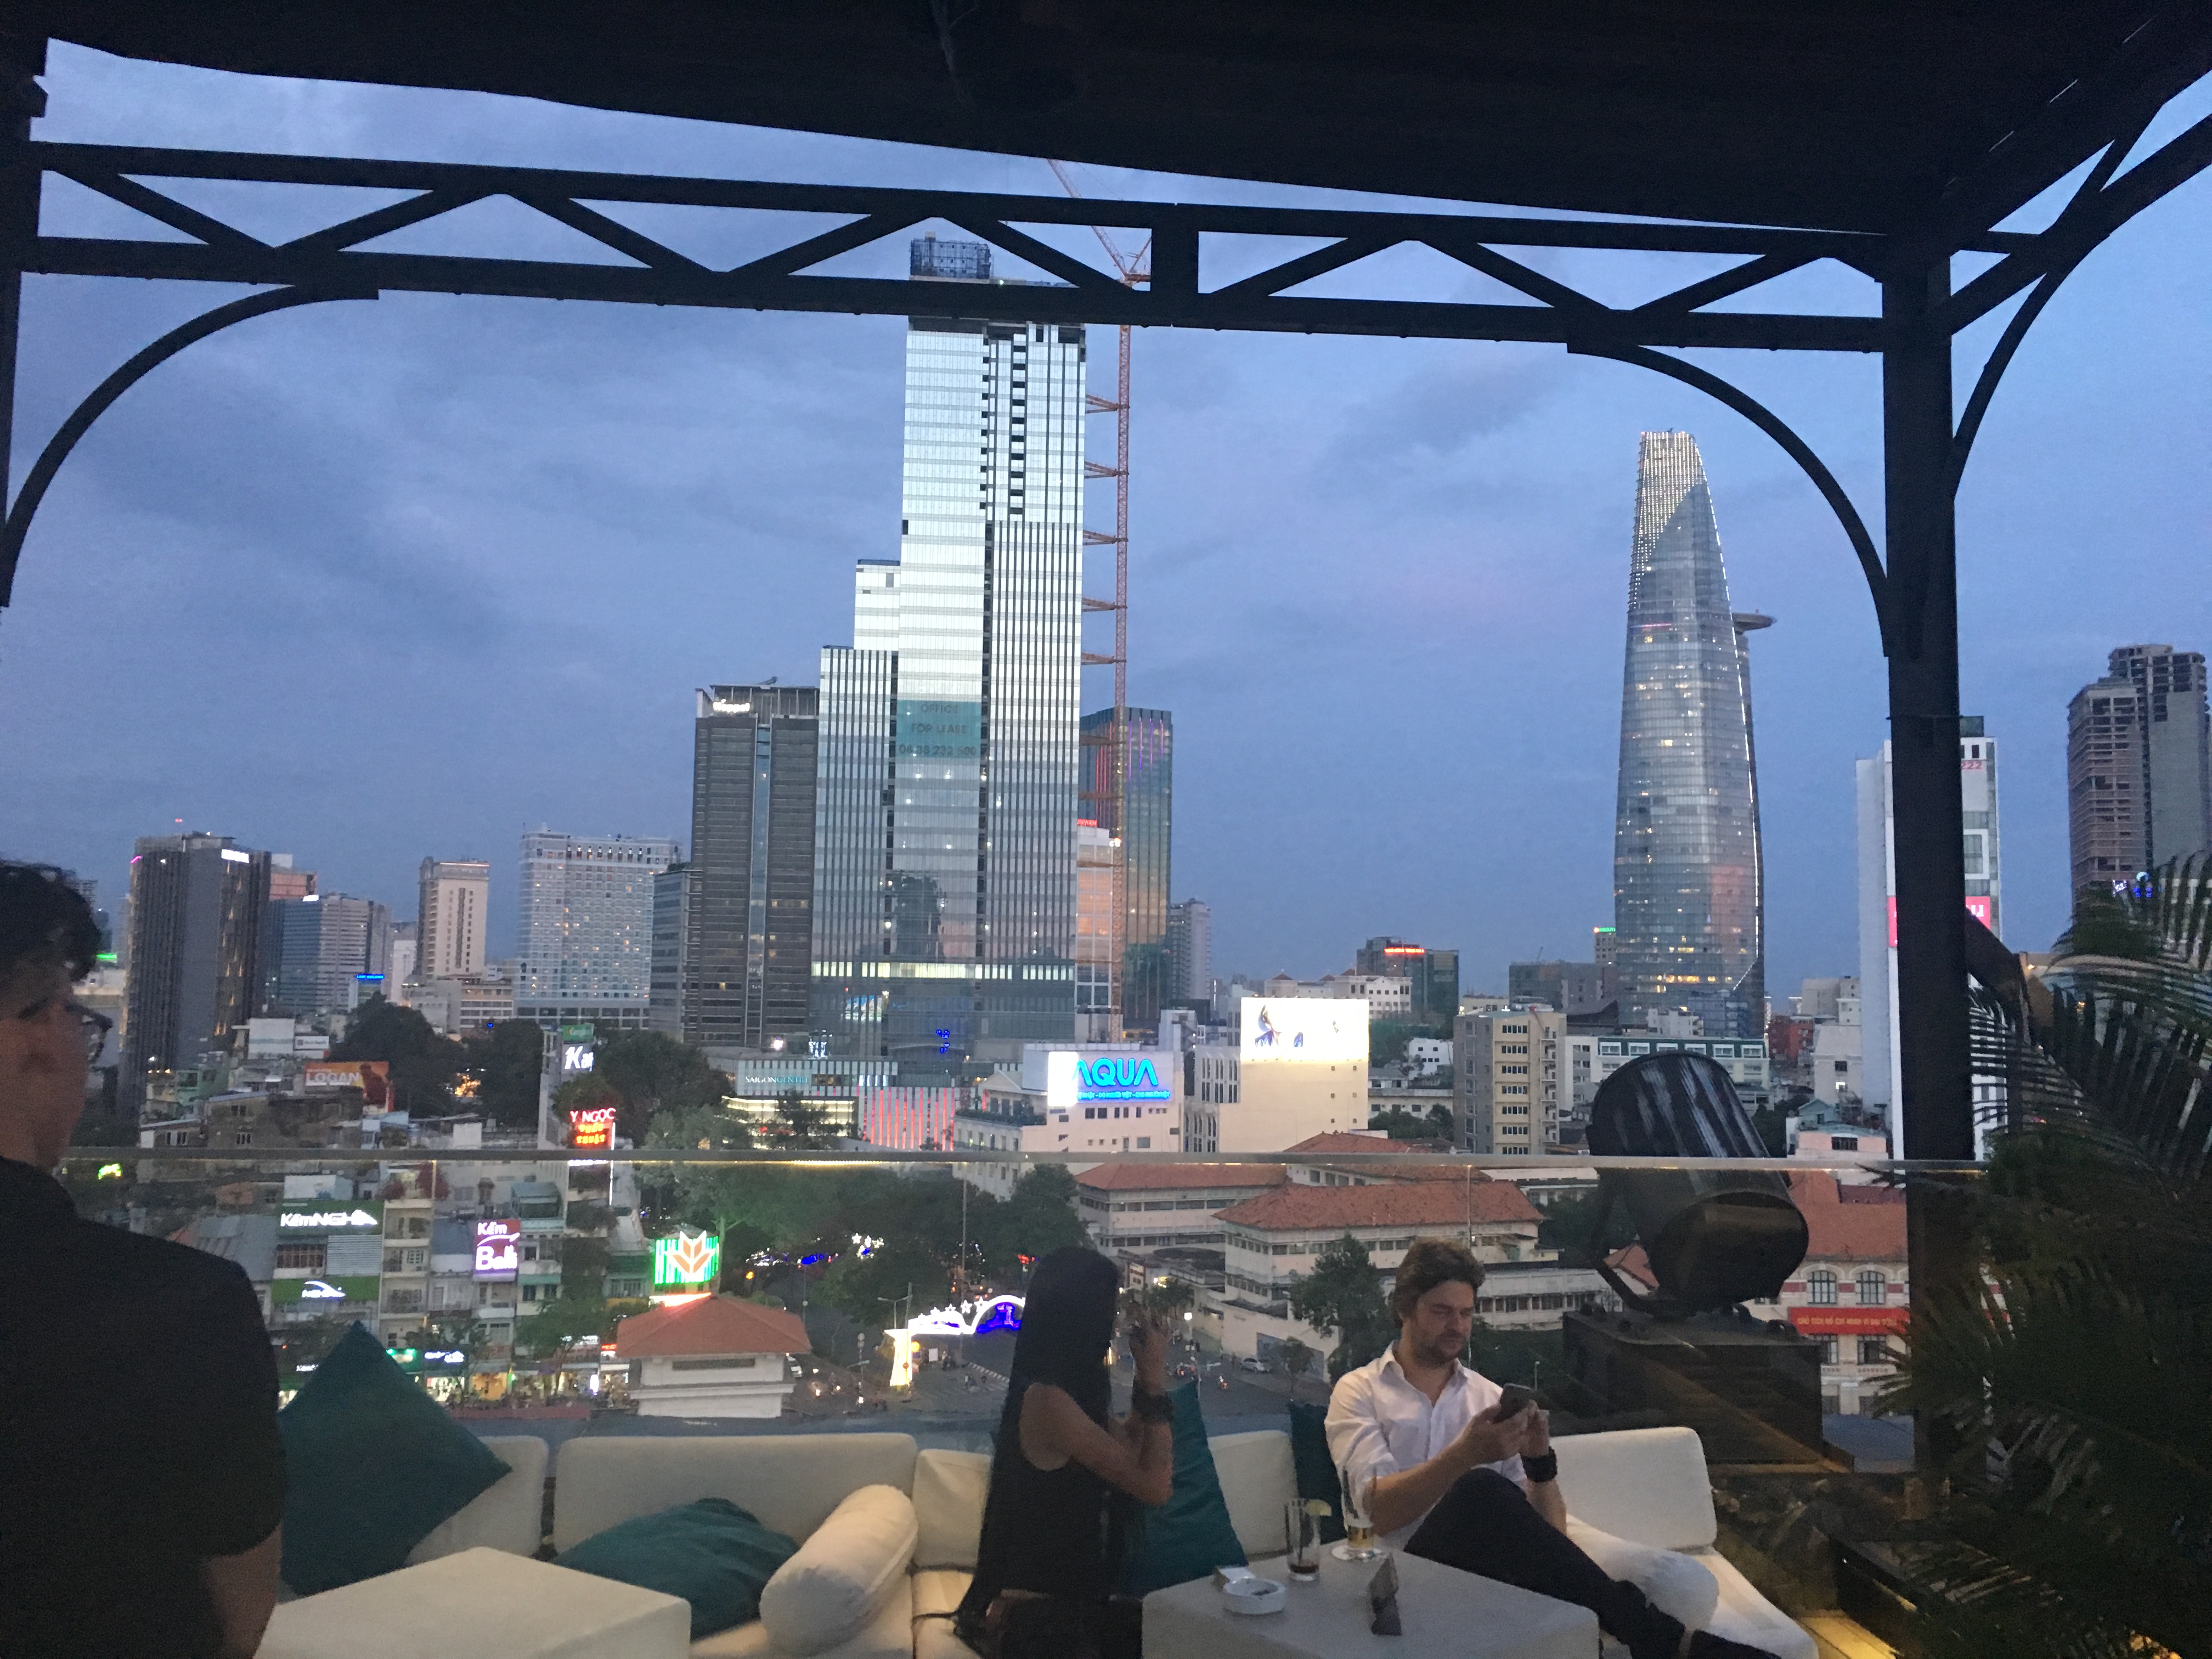 Views from OMG rooftop bar in Ho Chi Minh City, Vietnam.